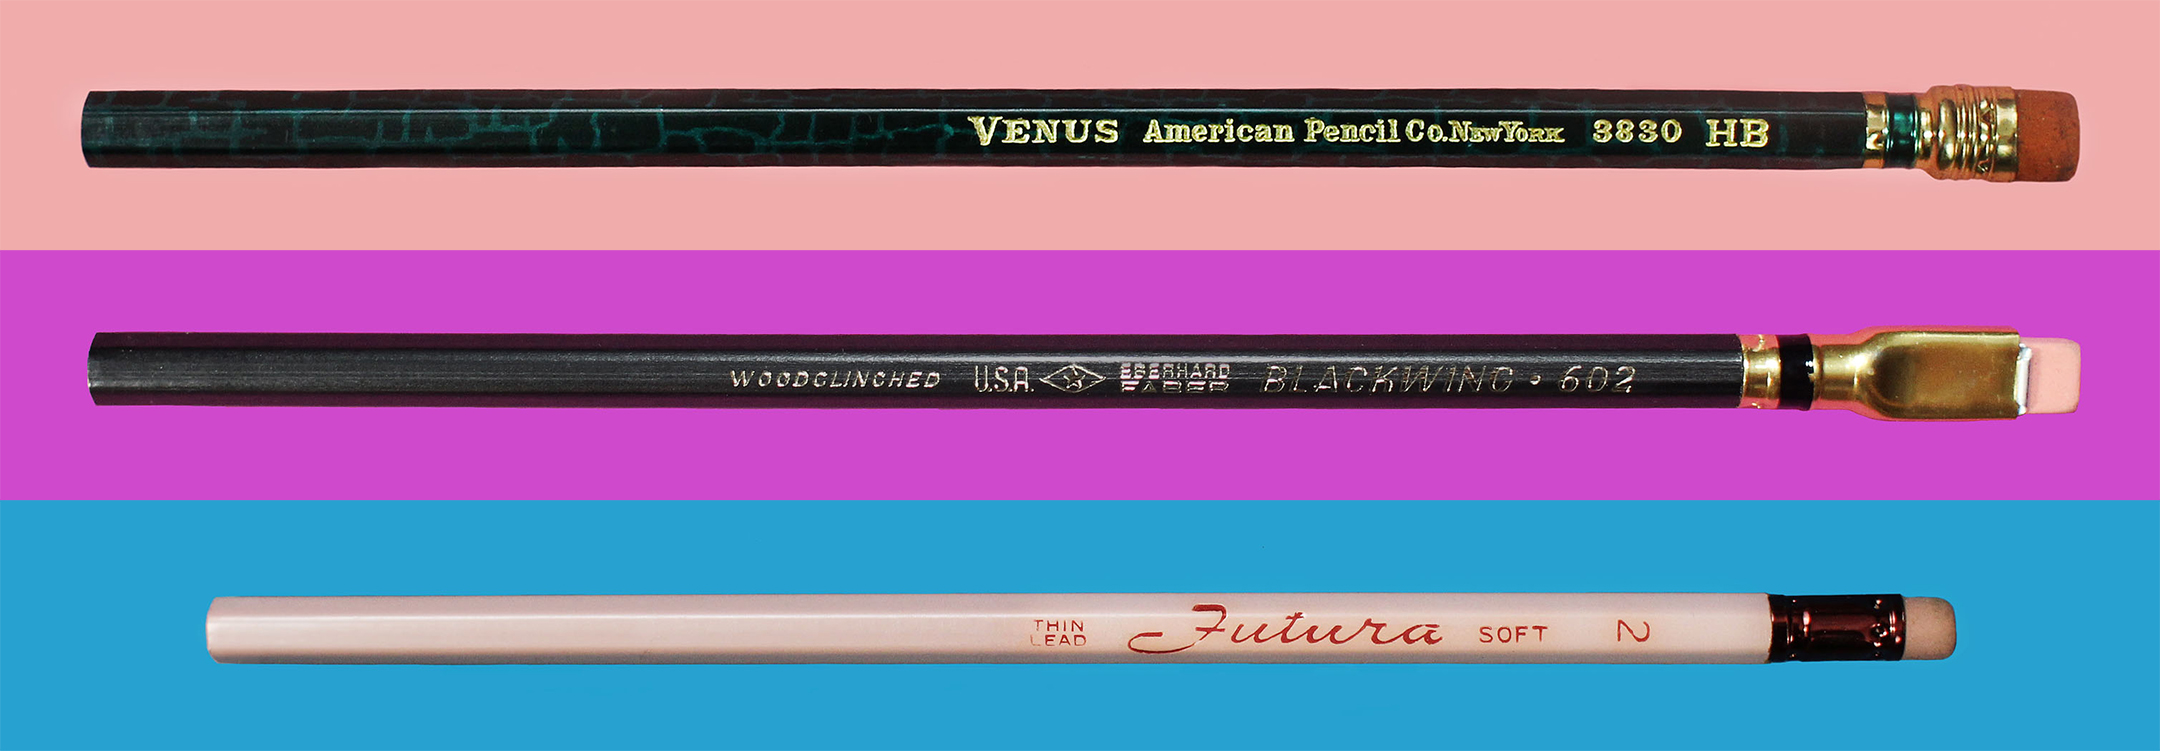 three different historic pencils, one on a peach background, one on a fuchsia background, and one on a blue background 